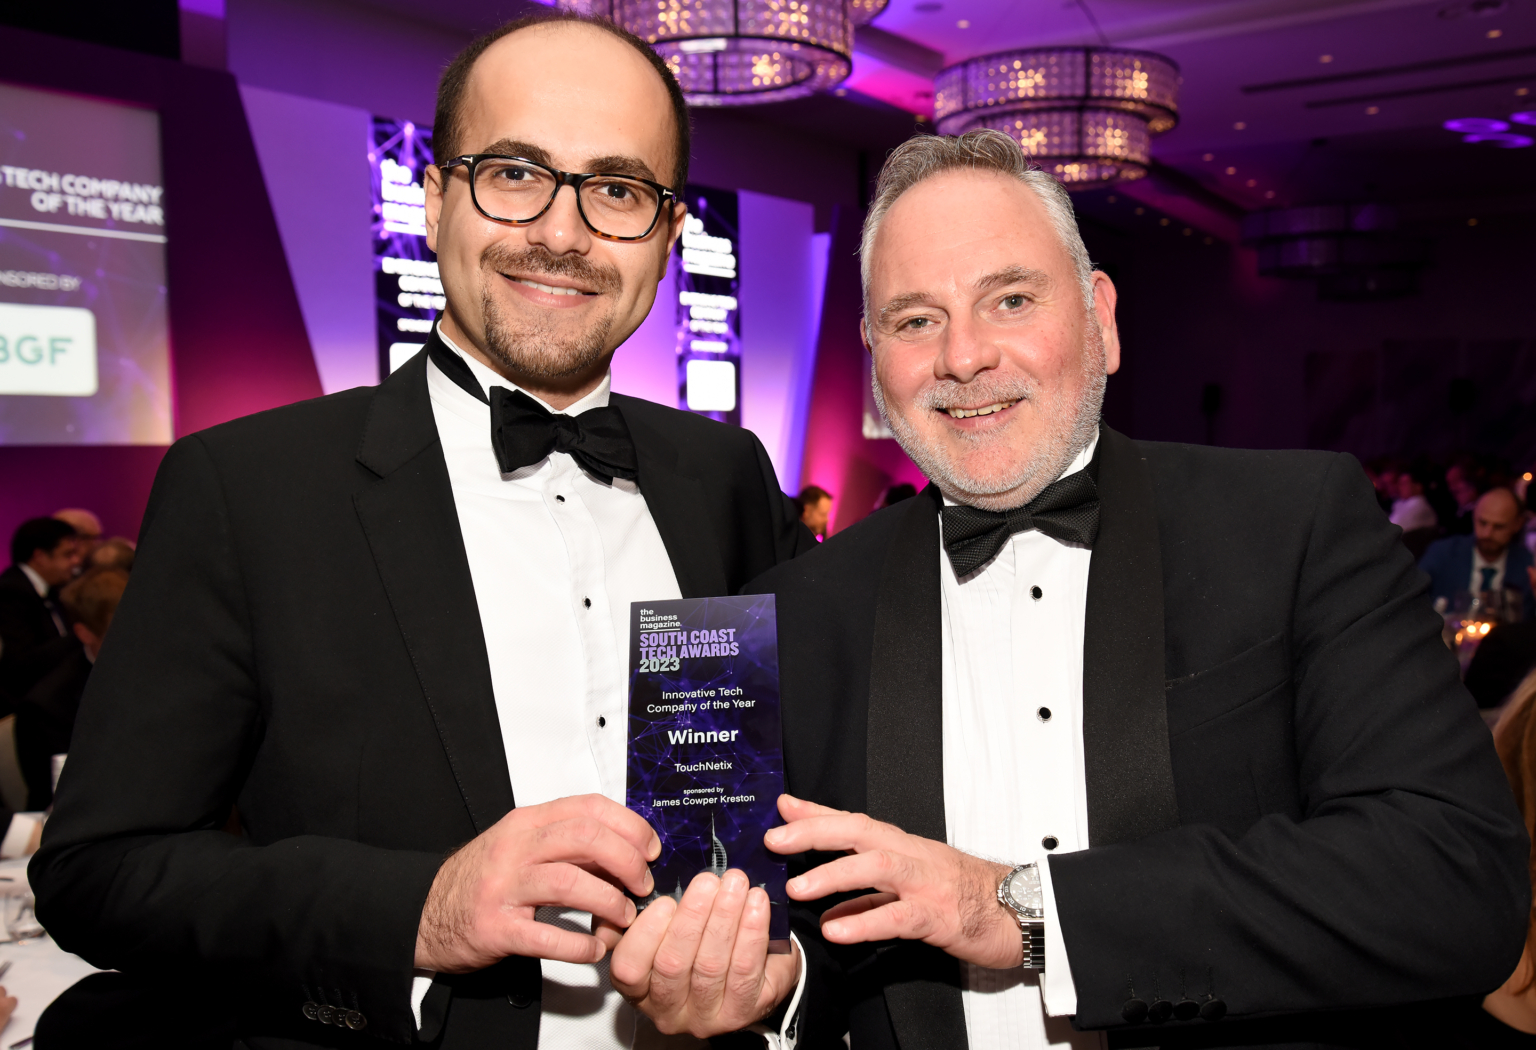 George East of TouchNetix, winner of Innovative Tech Company of the Year